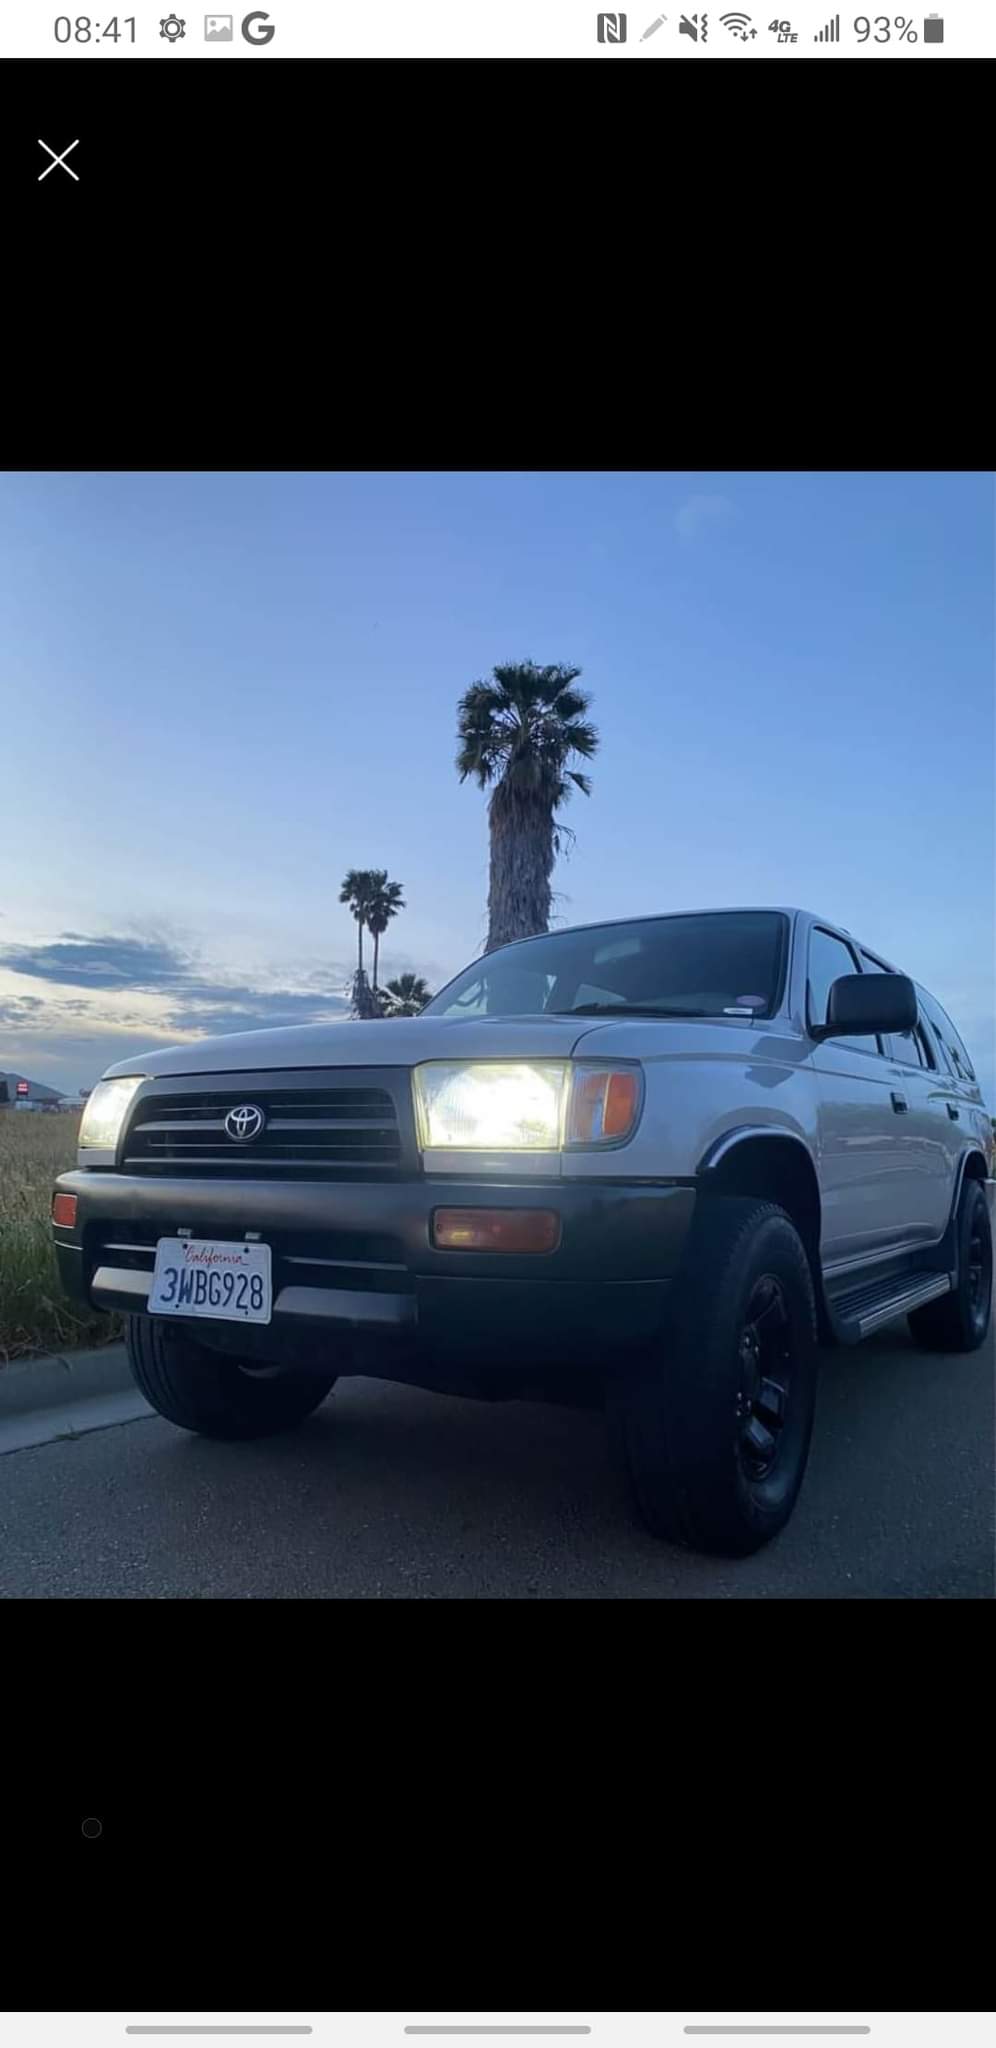 1997 4runner with 260k miles for 00-received_764851524902069-jpeg